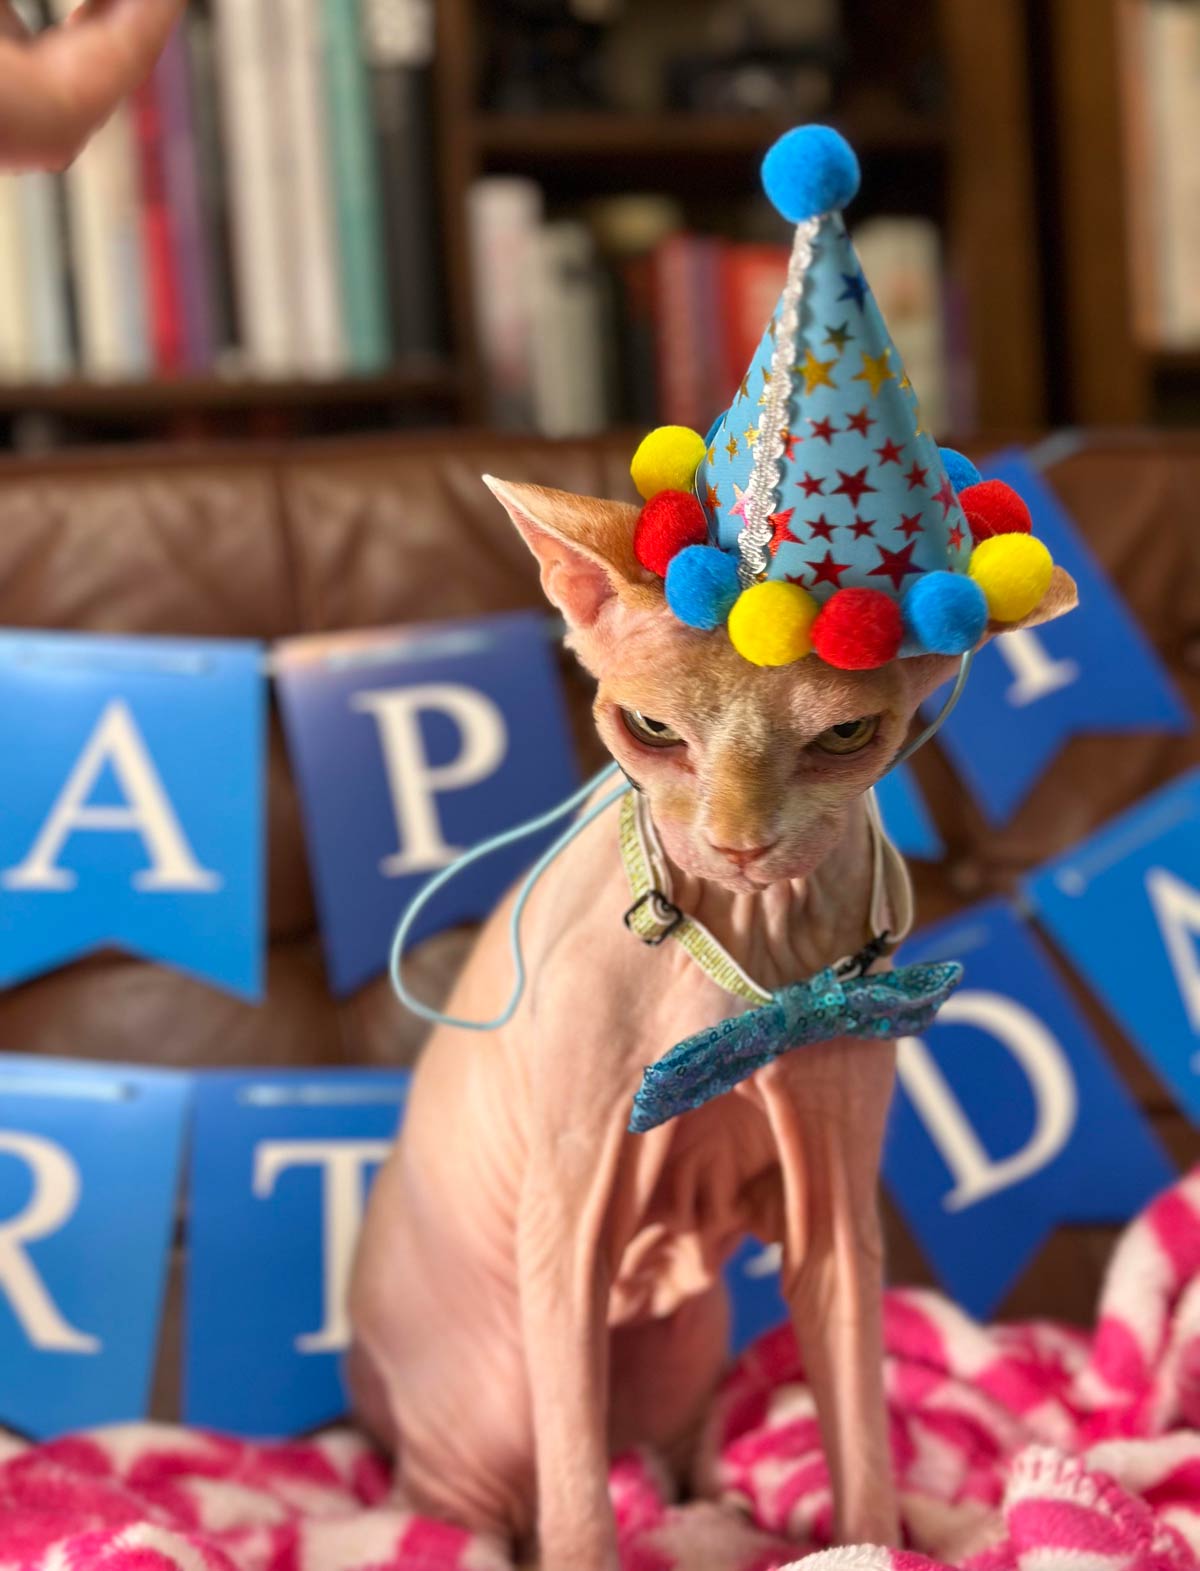 Our cat turned 19 on New Year's Day